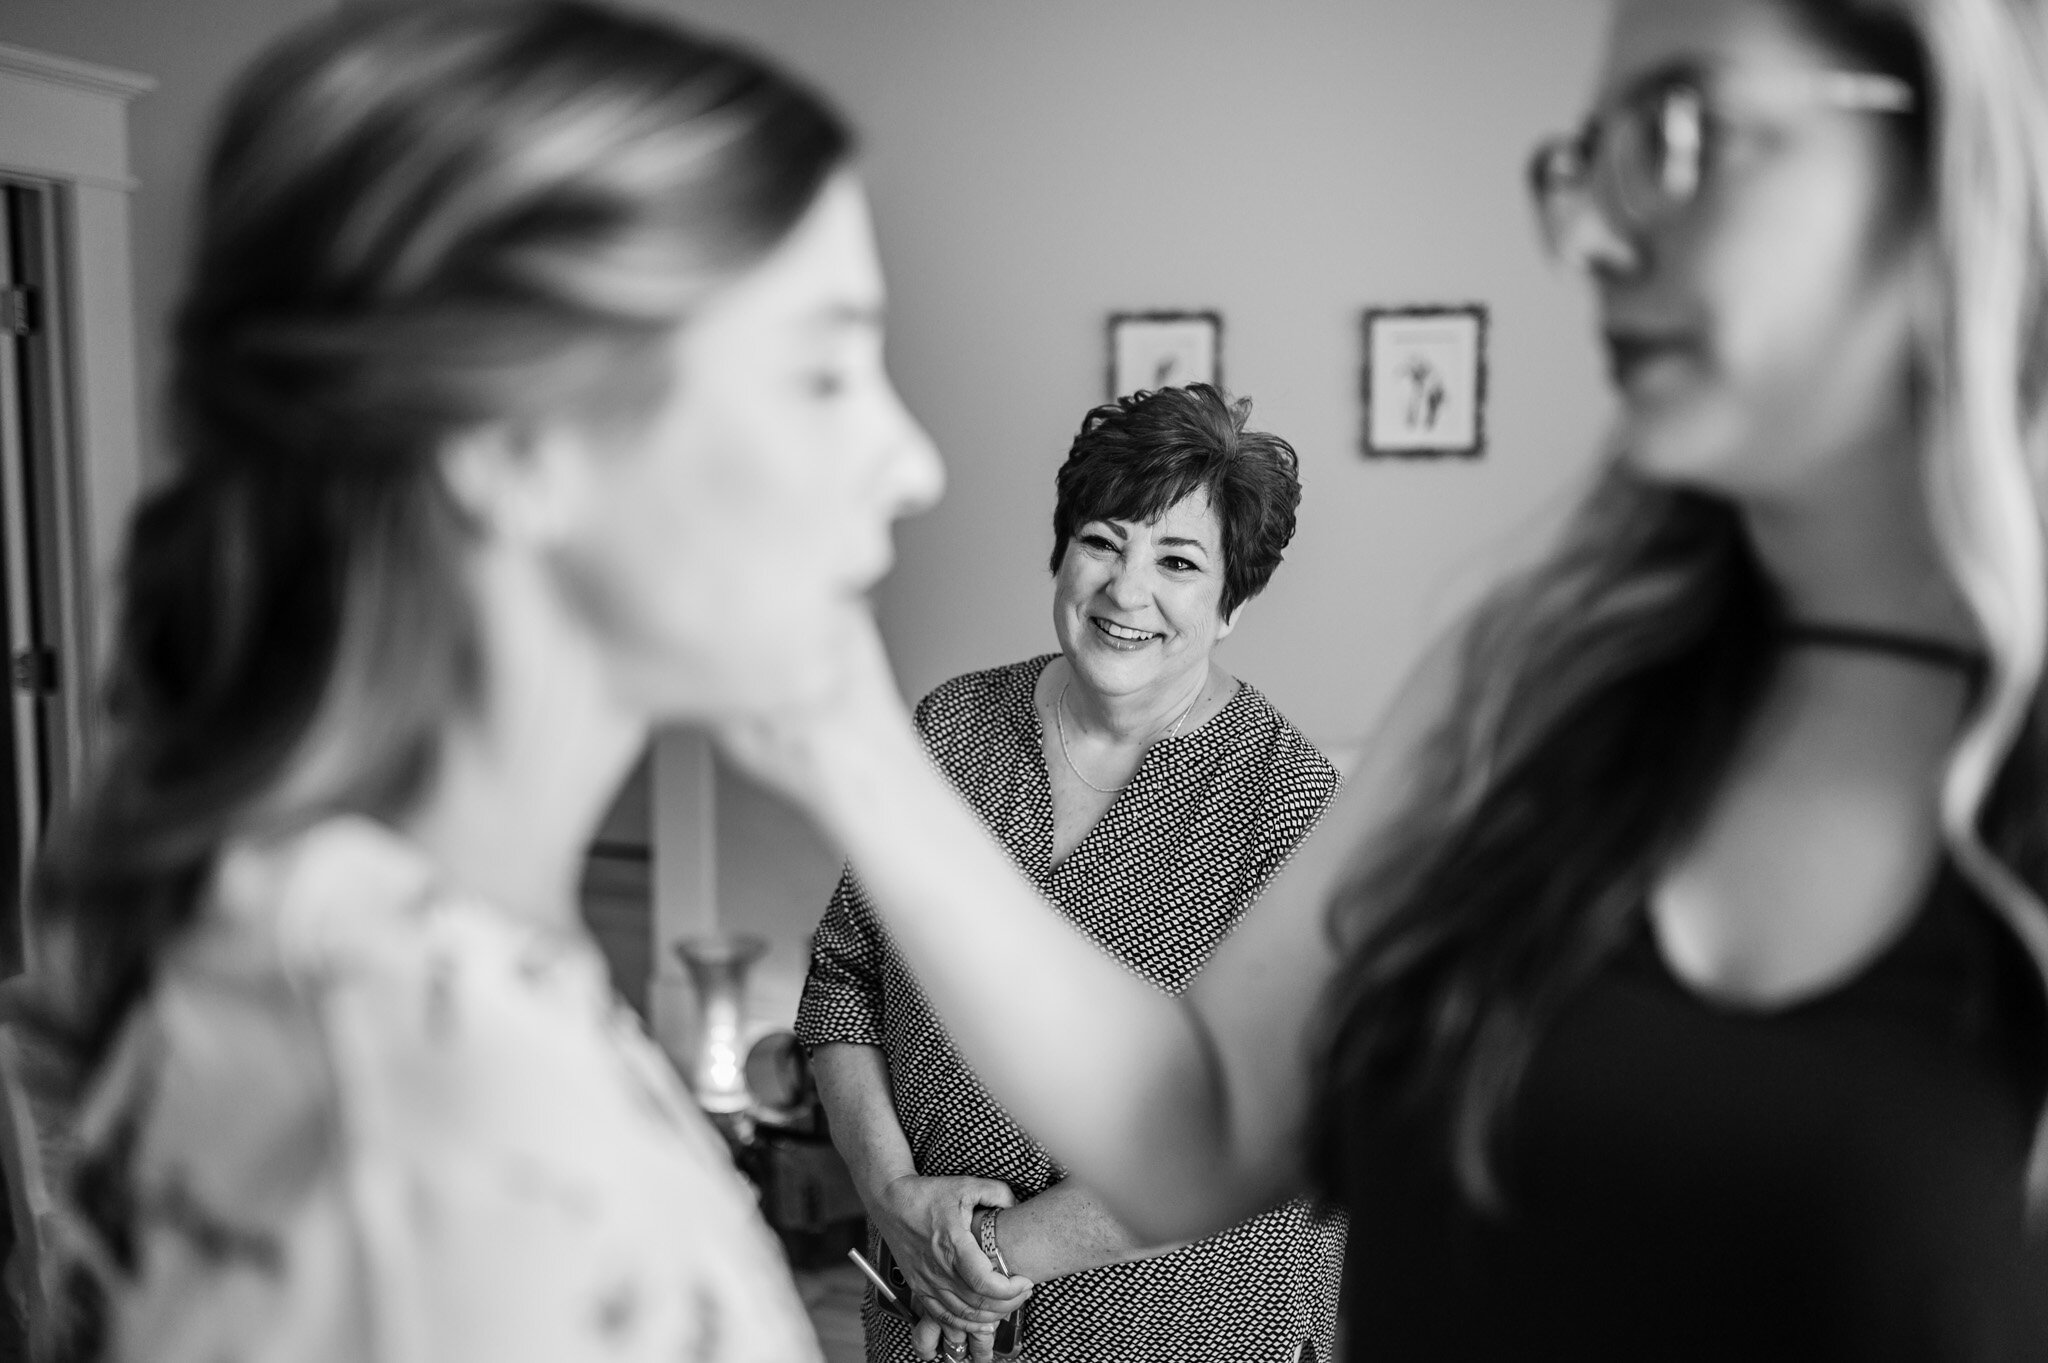 Mom looks at her daughter getting ready on her wedding day